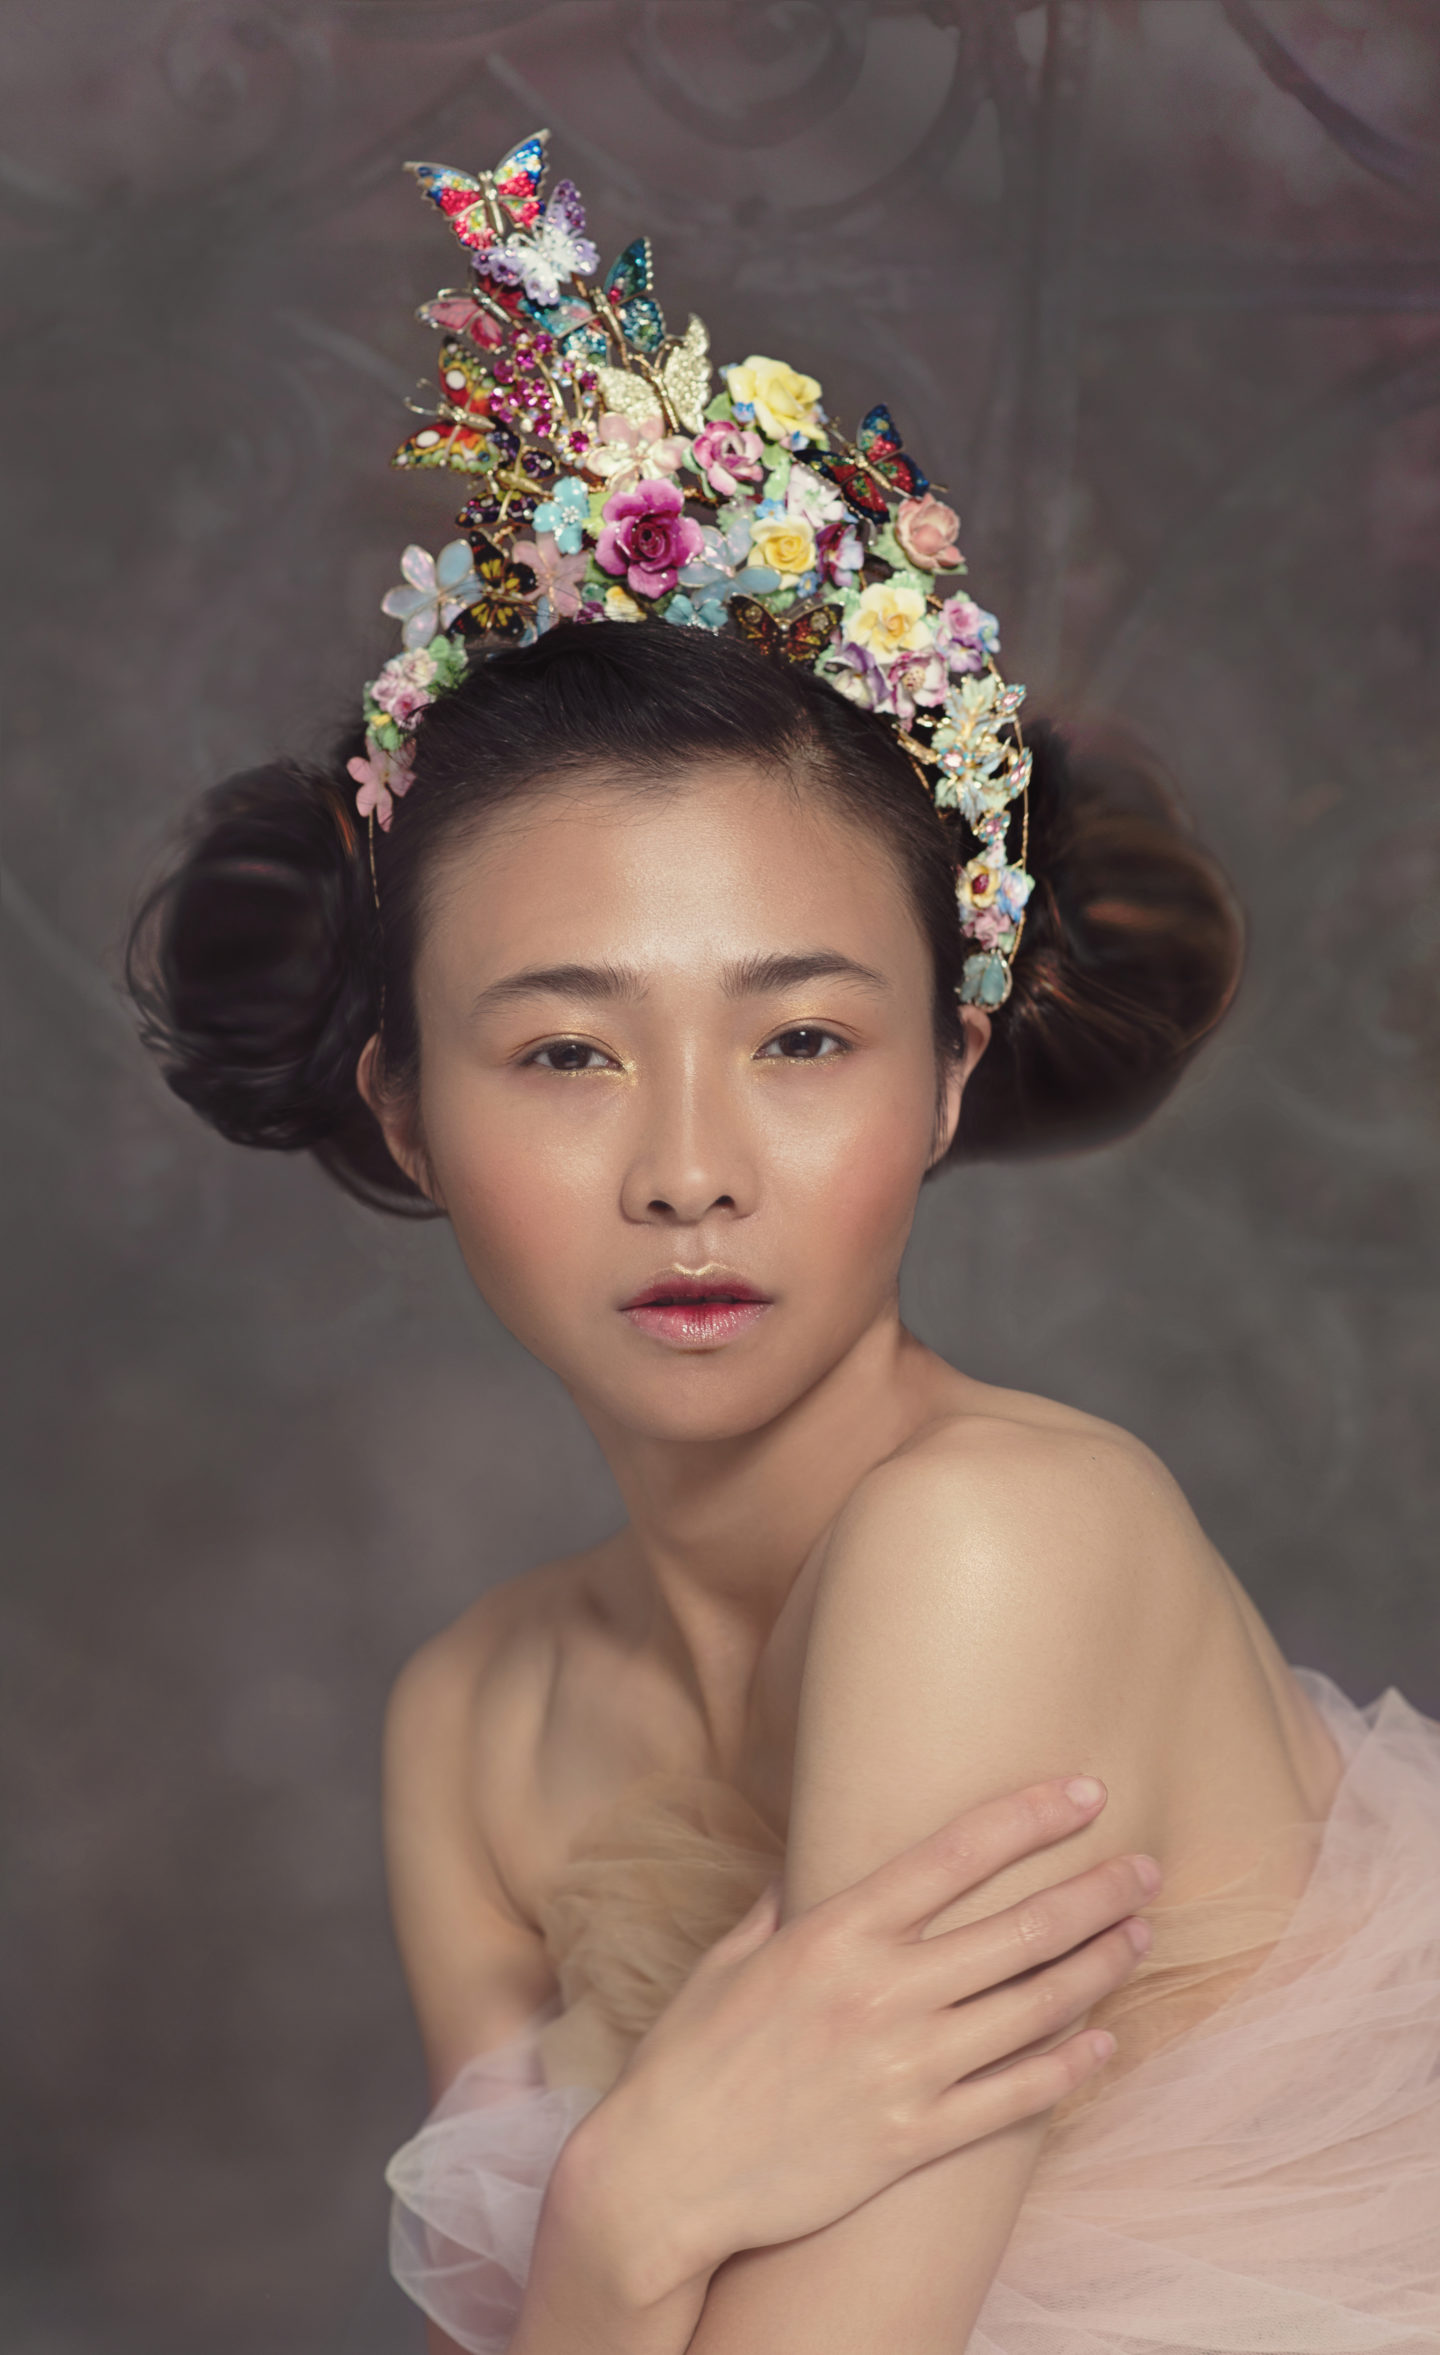 Re-cycled Floral Bridal Accessories For An Avant Garde Wedding Look